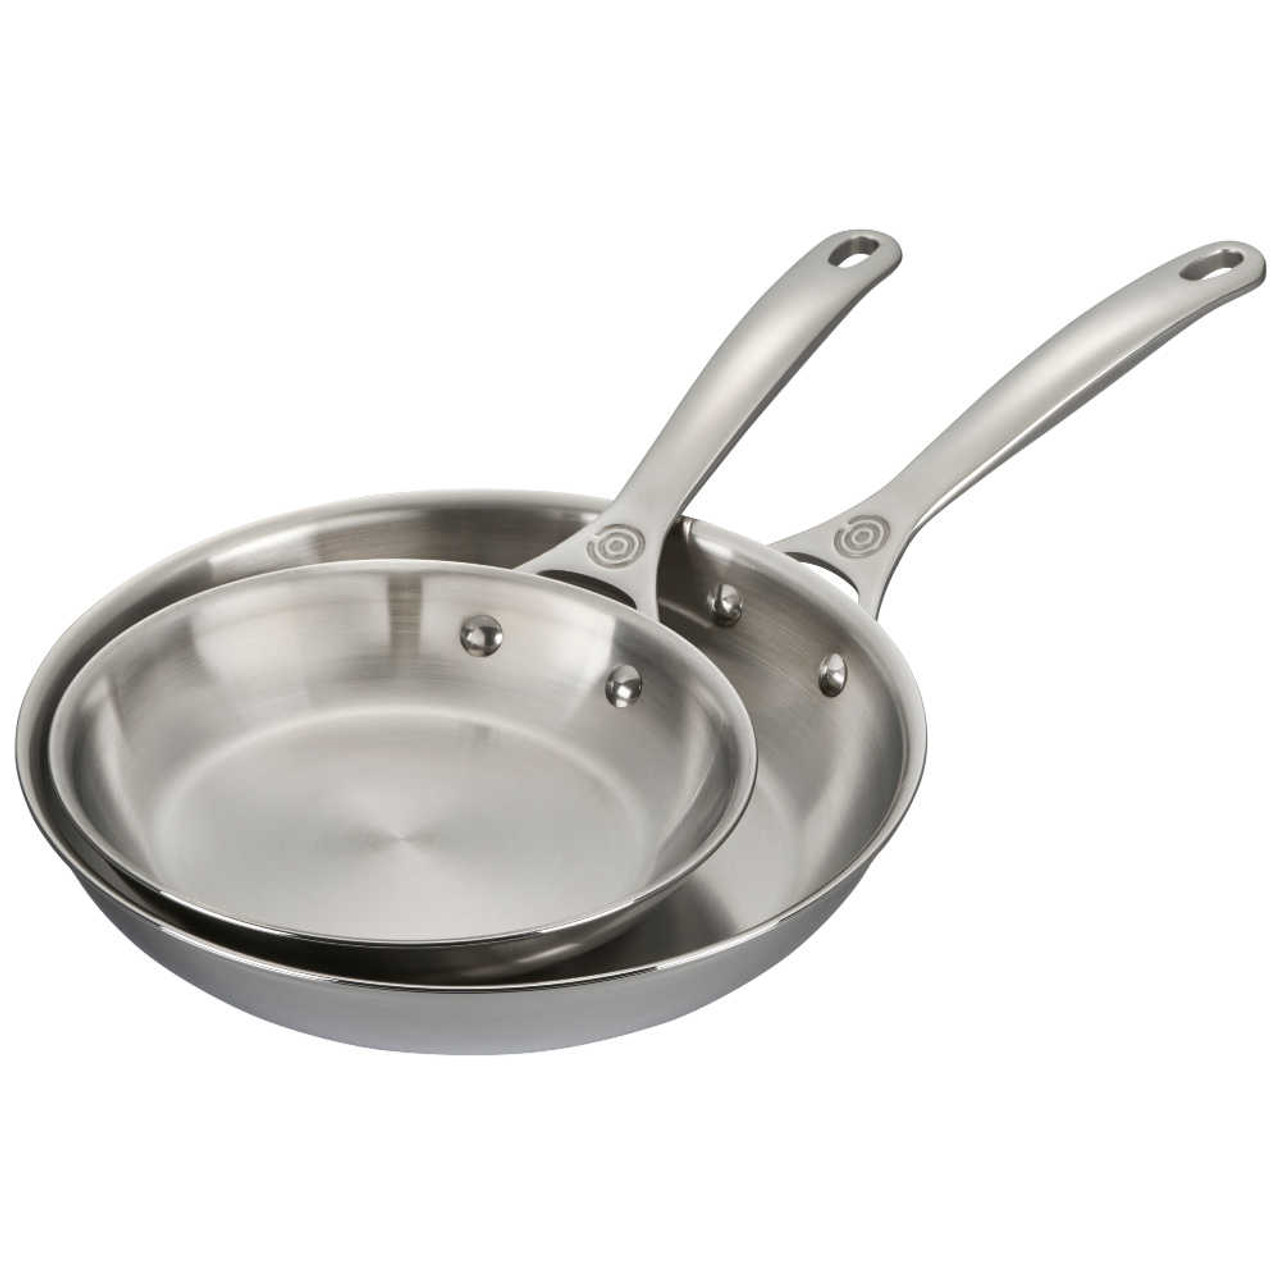 Le Creuset Stainless Steel Fry Pan 12-Inch - Fante's Kitchen Shop